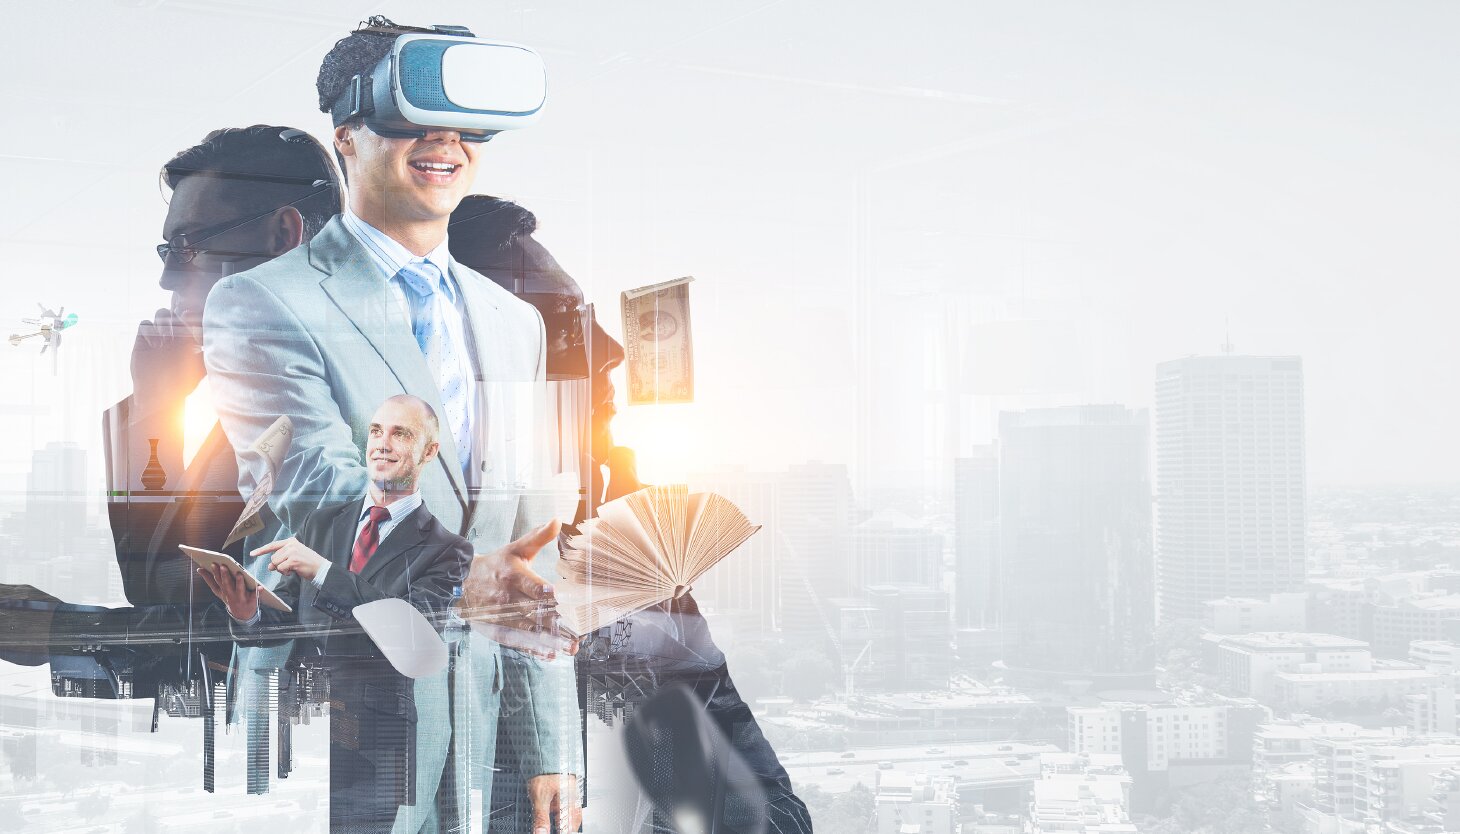 From game rooms to boardrooms: Virtual and Augmented Reality at work